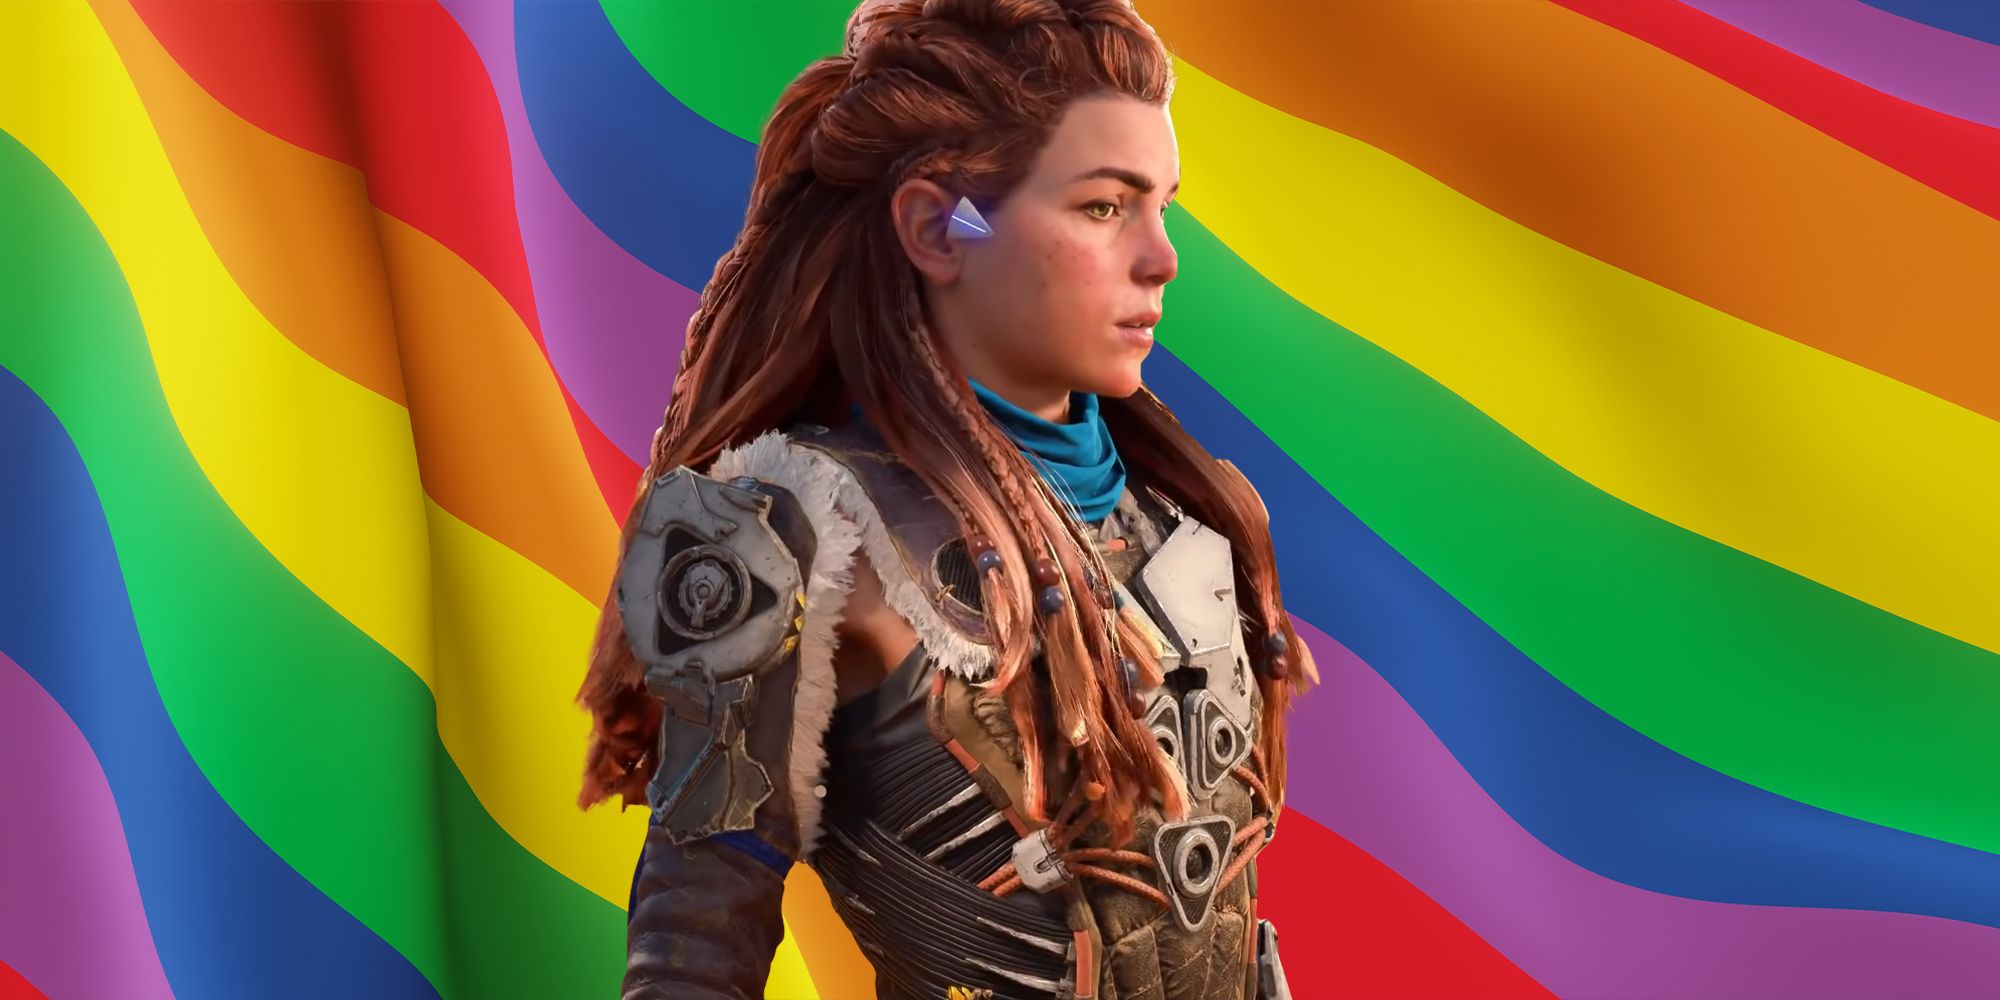 Aloy from Horizon Forbidden West standing in front of a waving LGBTQ+ flag